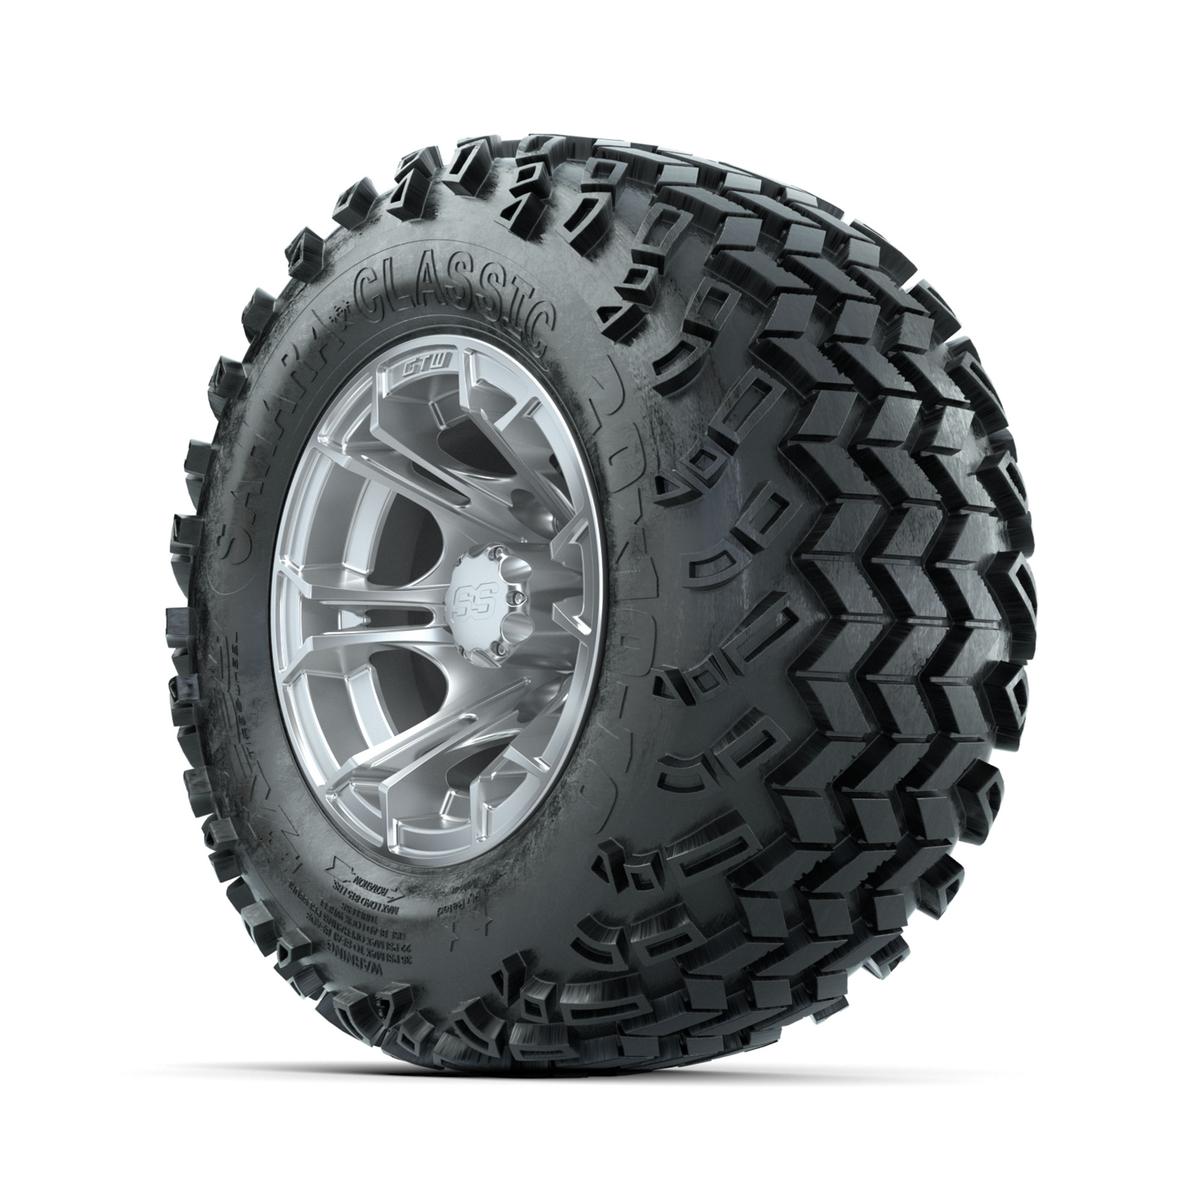 GTW Spyder Silver Brush 10 in Wheels with 20x10-10 Sahara Classic All Terrain Tires – Full Set